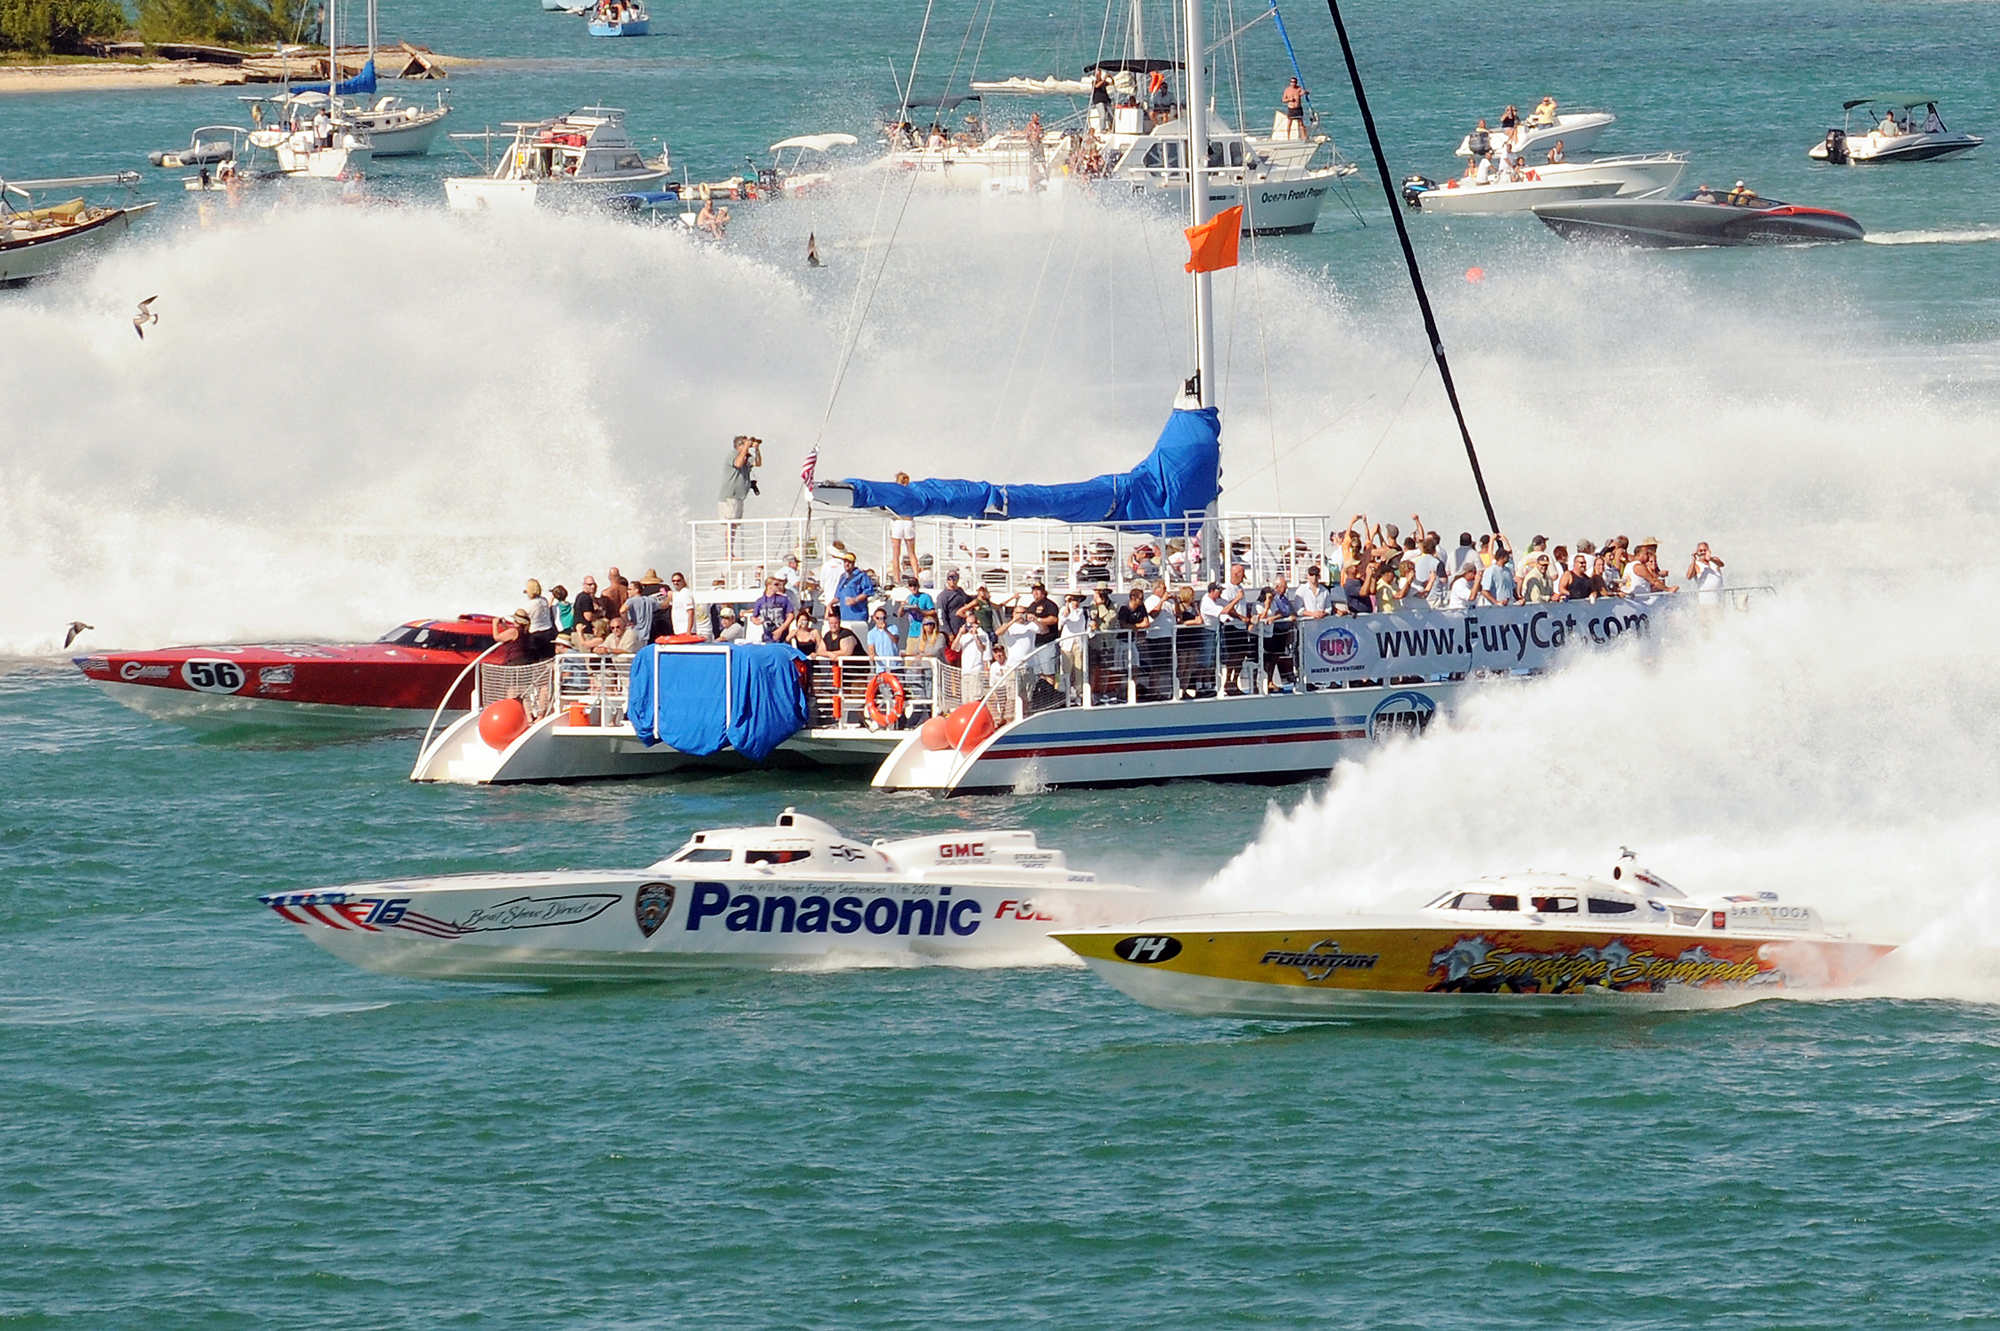 Watching The Key west Superboat Races